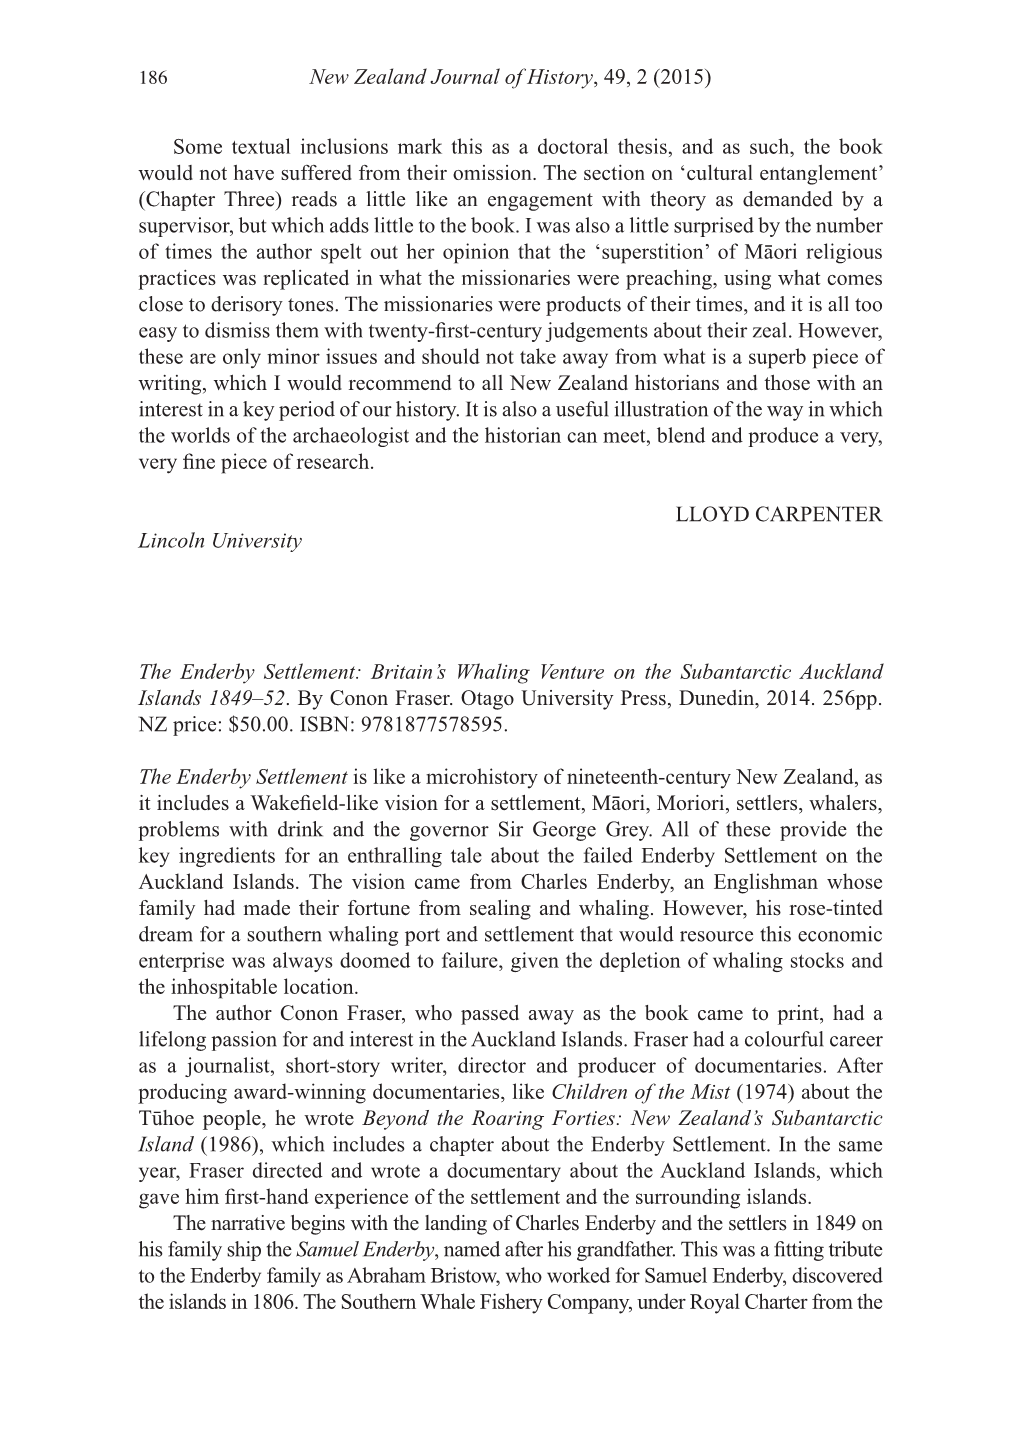 New Zealand Journal of History, 49, 2 (2015) Some Textual Inclusions